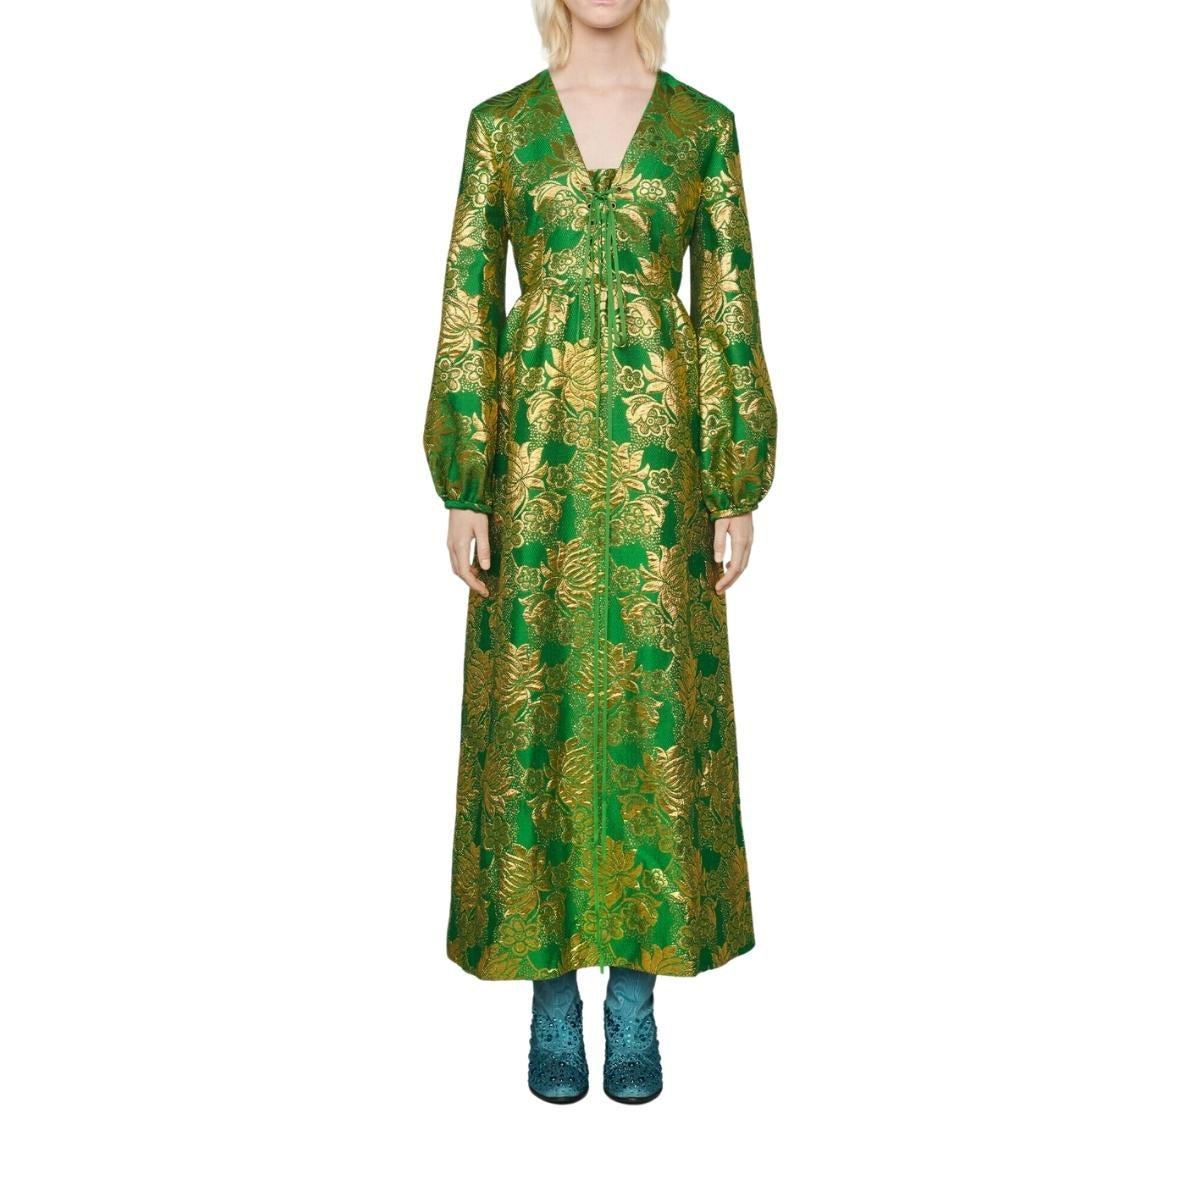 Green and gold floral patterned wool is punctuated by lamé detail on this front tie gown. Rich in pattern and decoration
Green and gold wool lamé floral jacquard
Lace detail
Due to the printing technique used, the placement of the pattern will vary